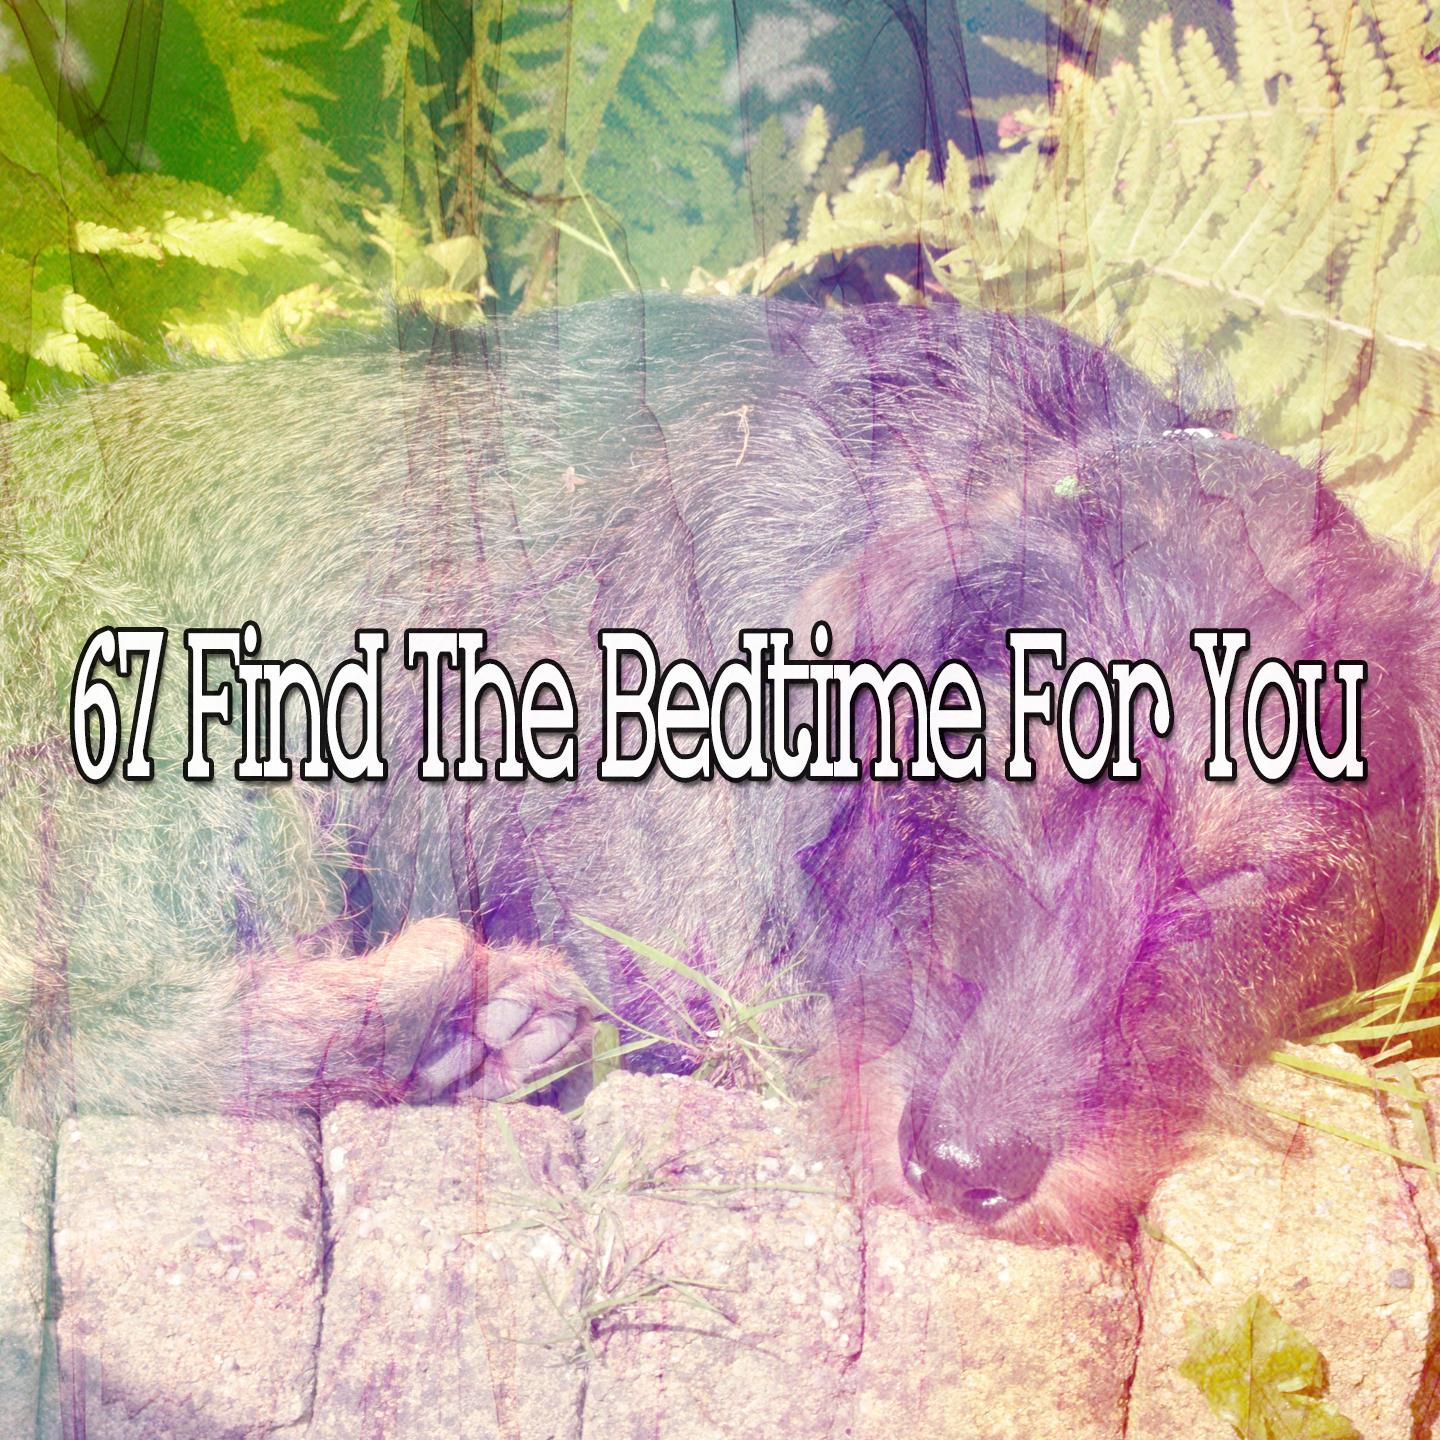 67 Find the Bedtime for You